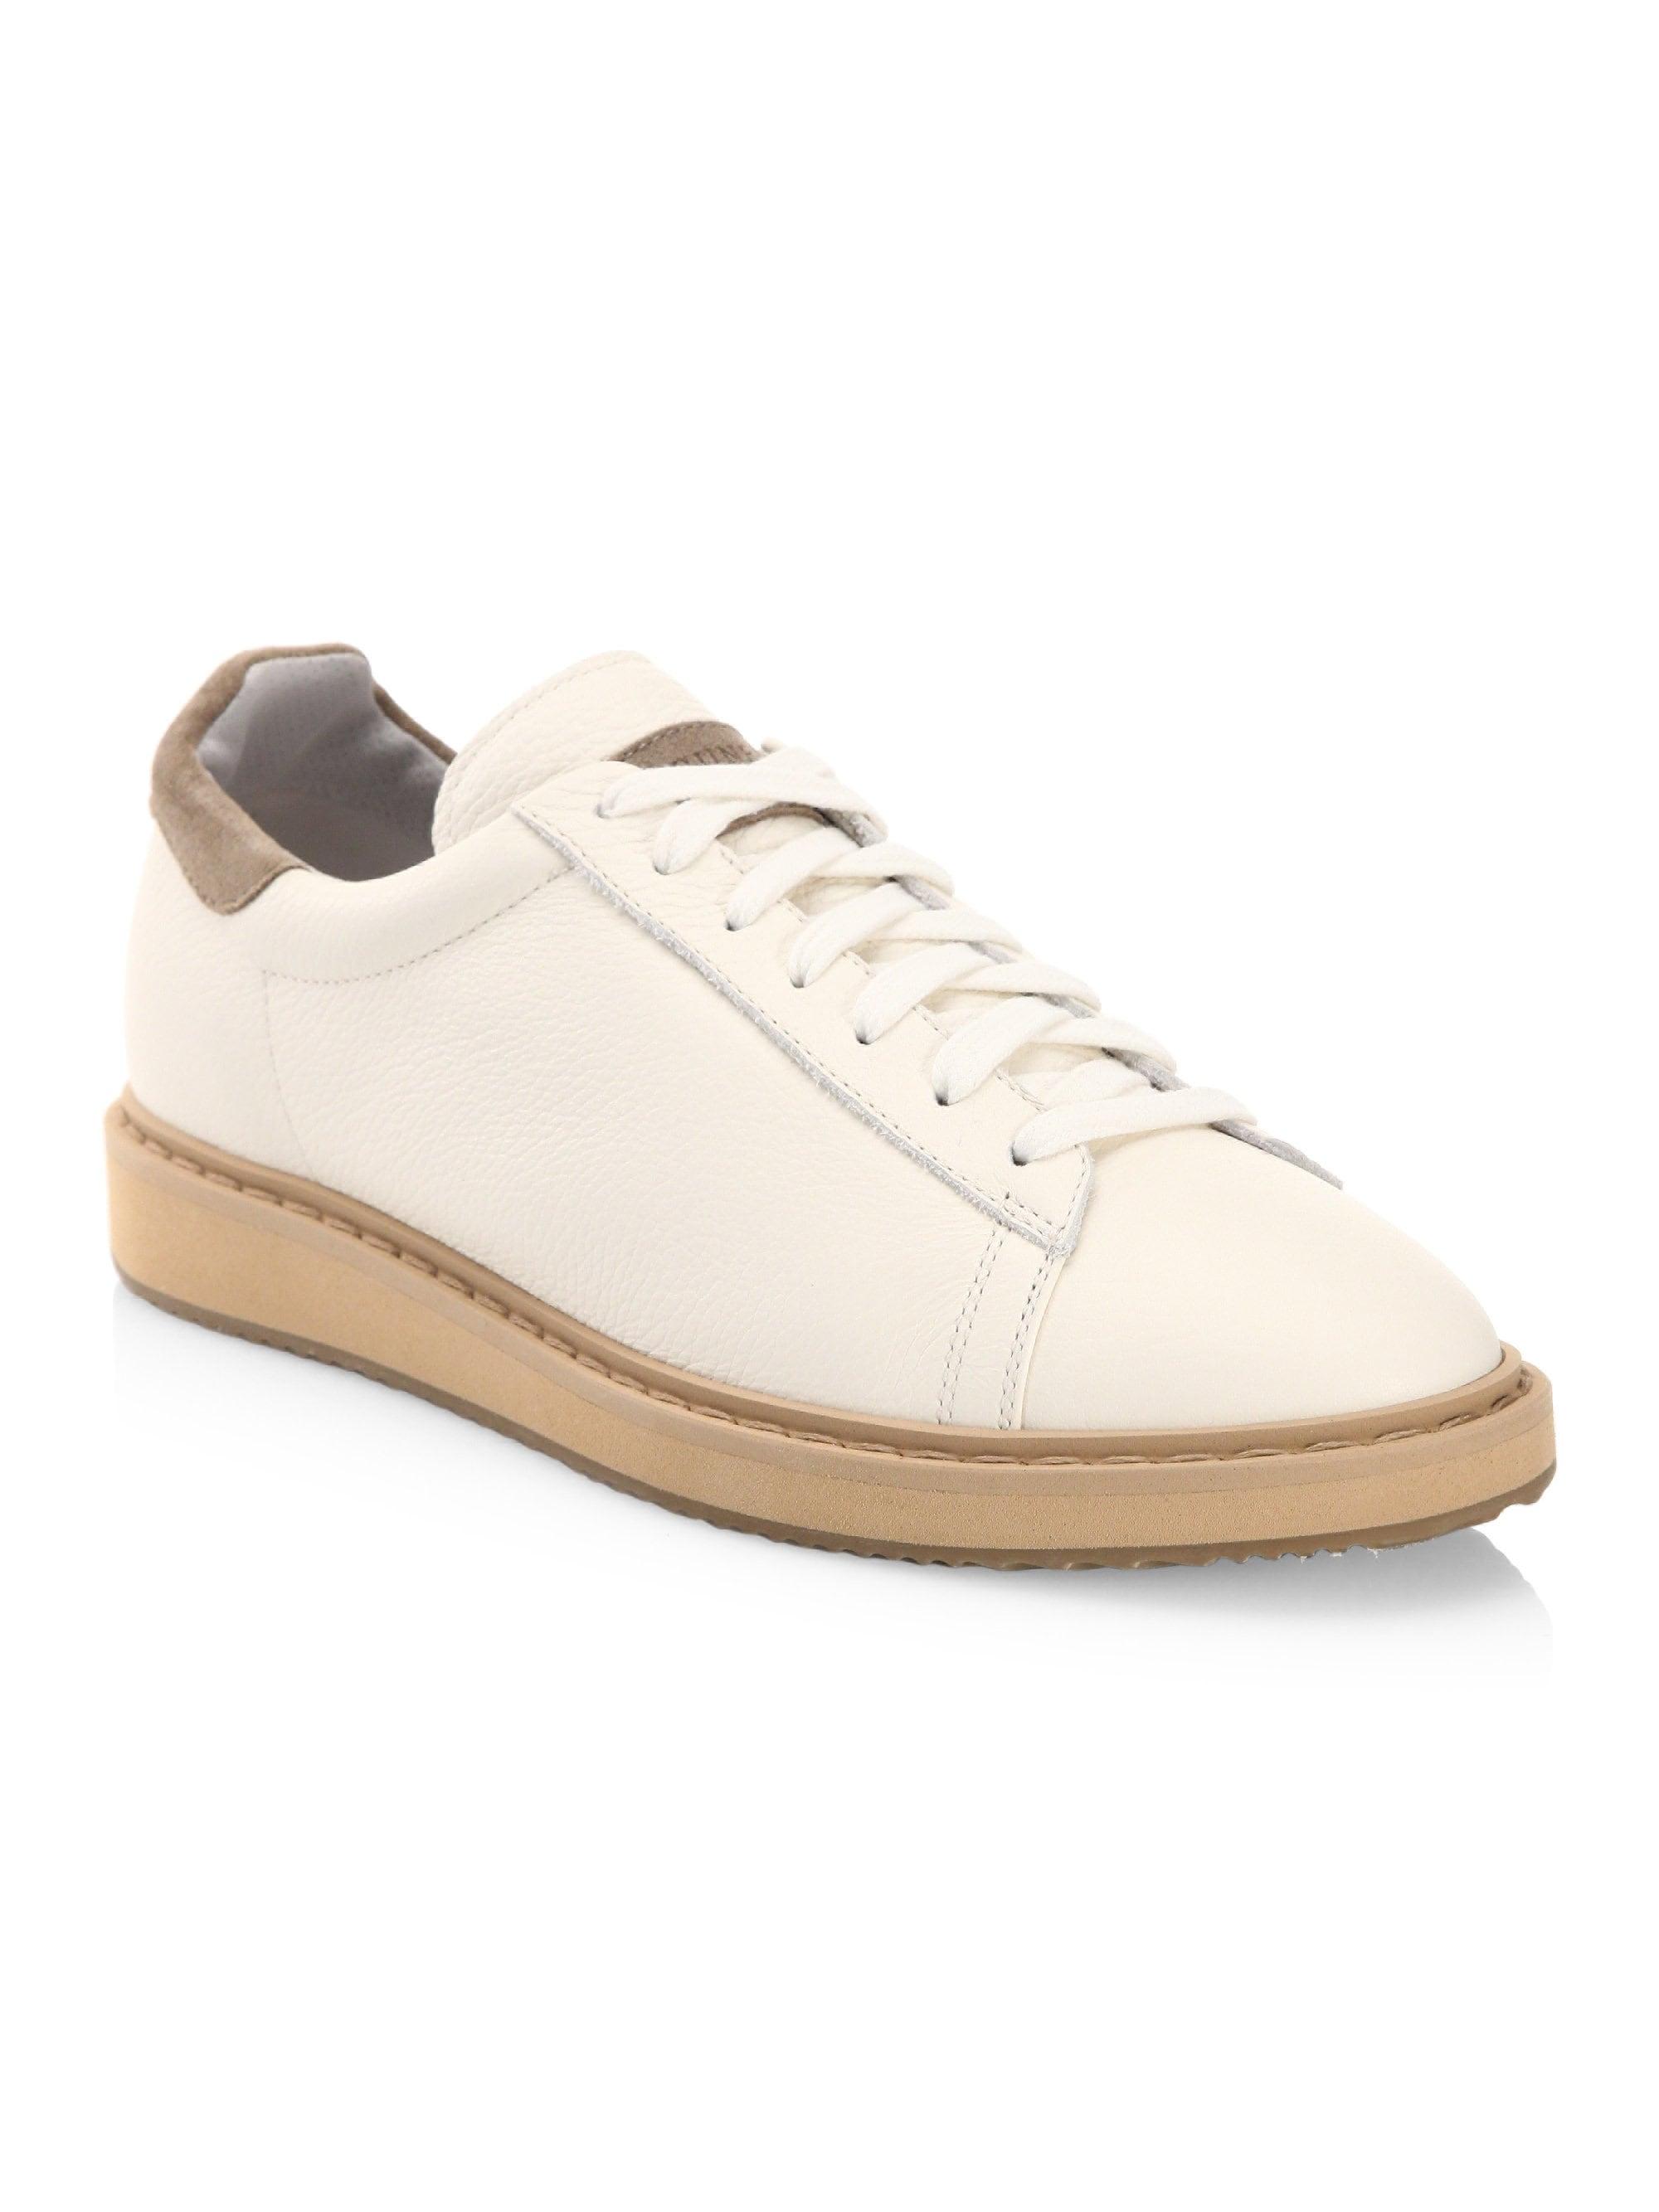 Lyst - Brunello Cucinelli Men's Leather Low-top Sneakers - Light Brown ...